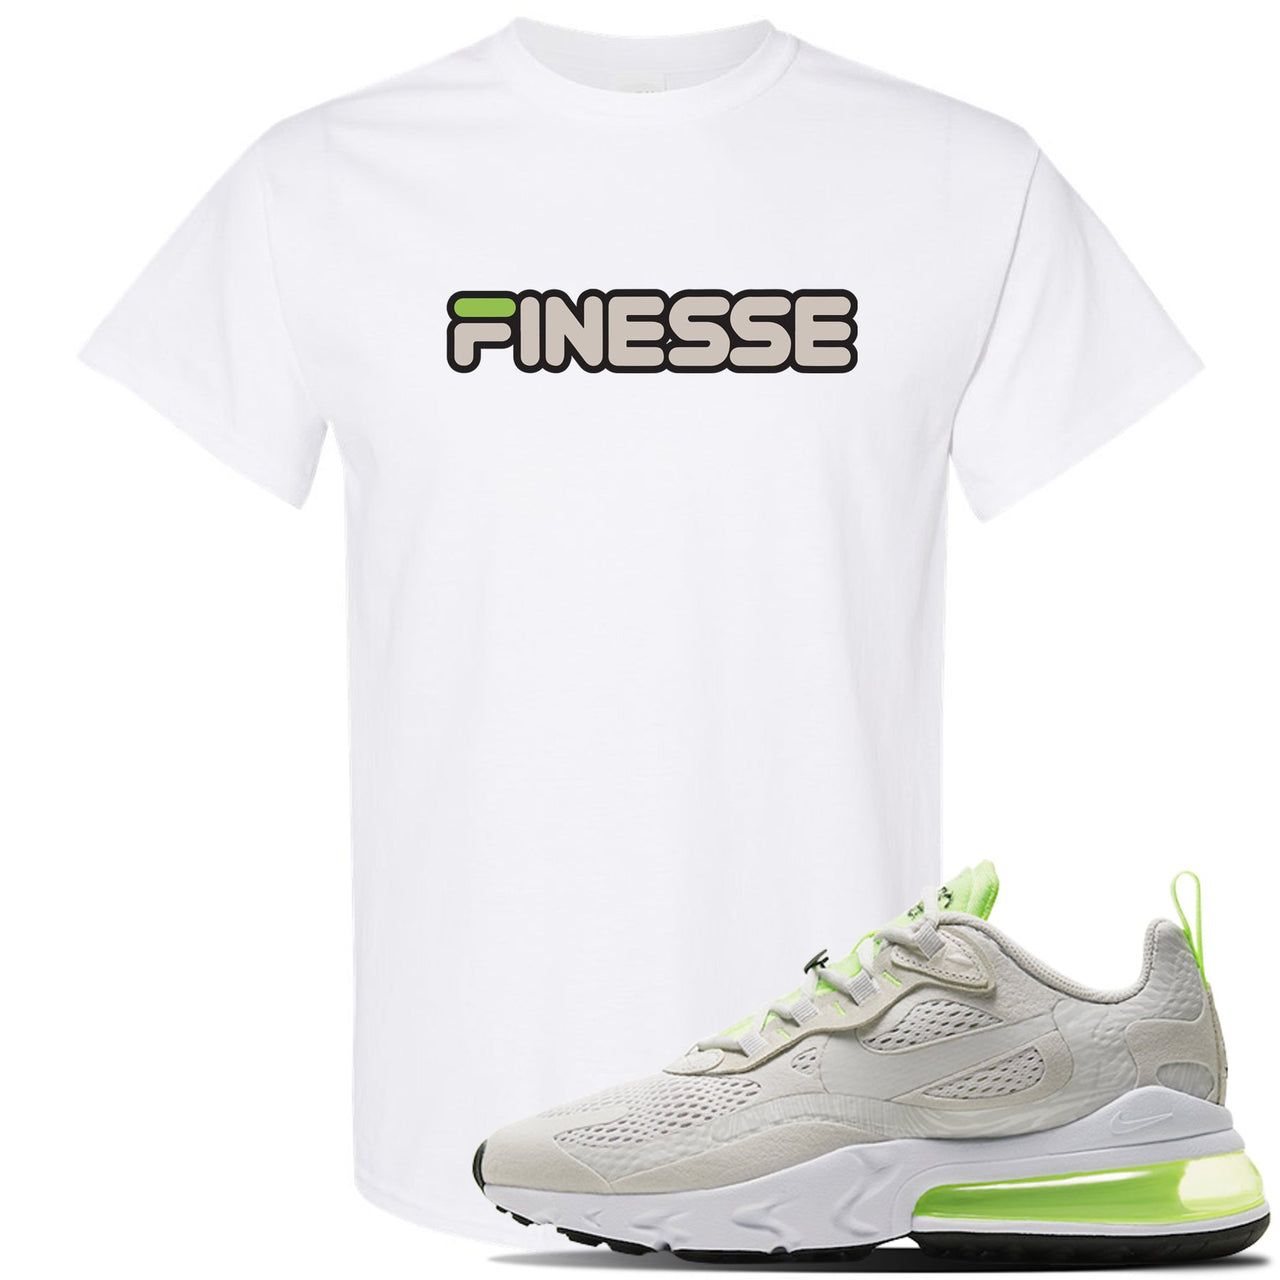 Ghost Green React 270s T Shirt | Finesse, White